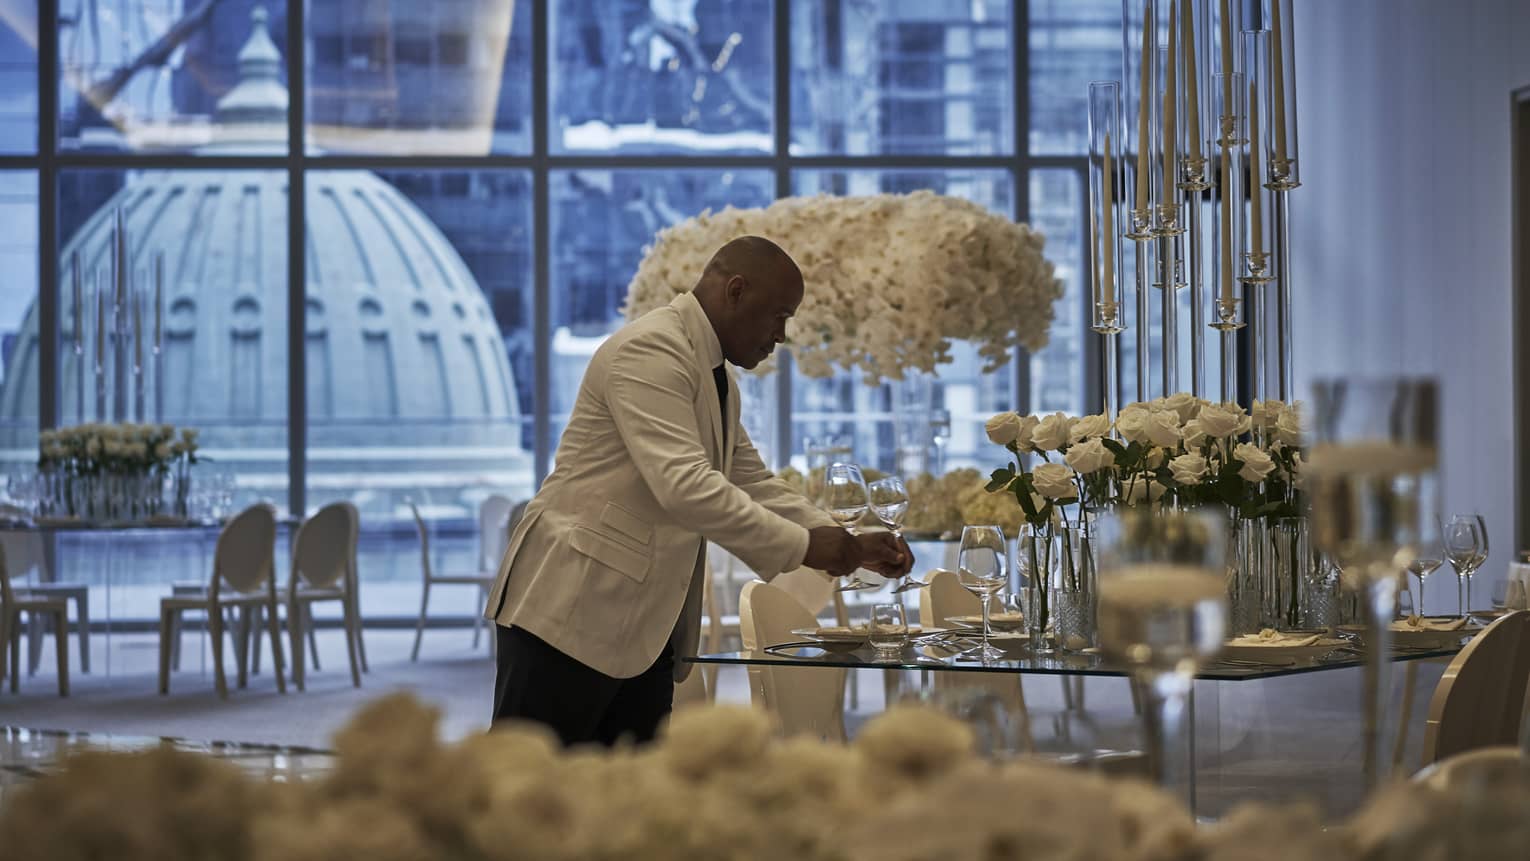 A four seasons staff does the finishing touches on a circular table in the ballroom, decorated with extravagant white florals